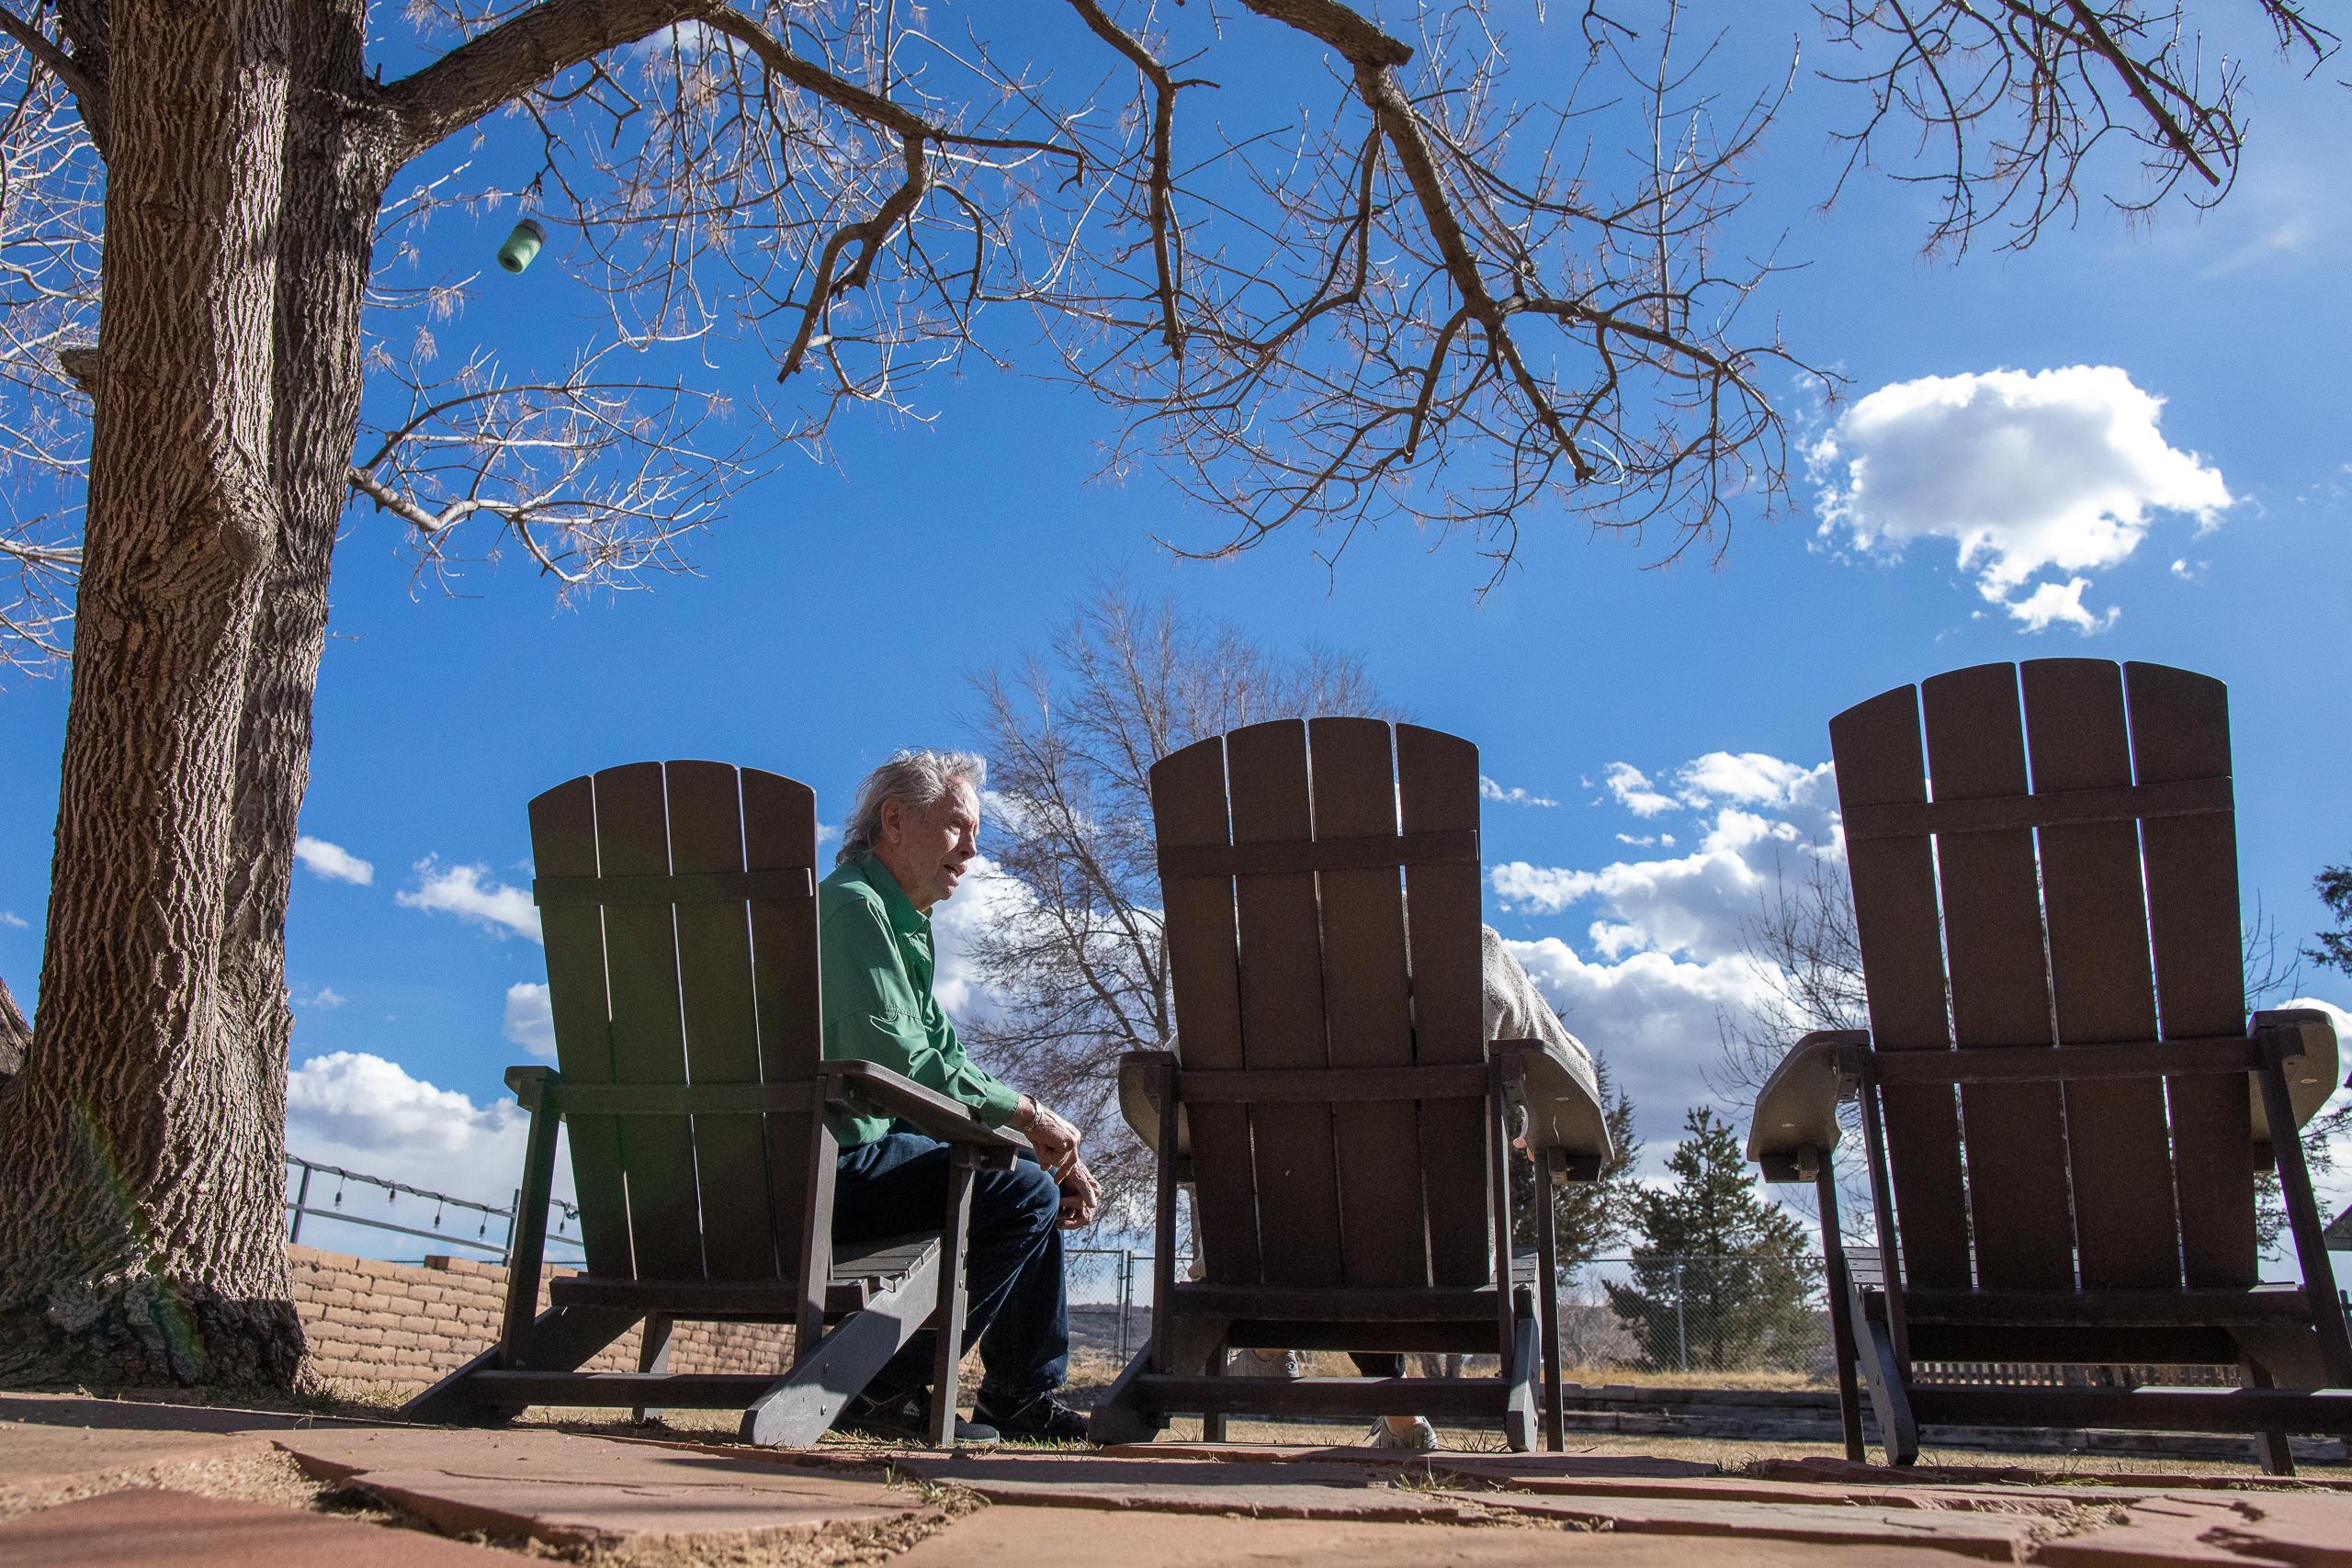 Senior Residential Assisted living, relaxing out doors,